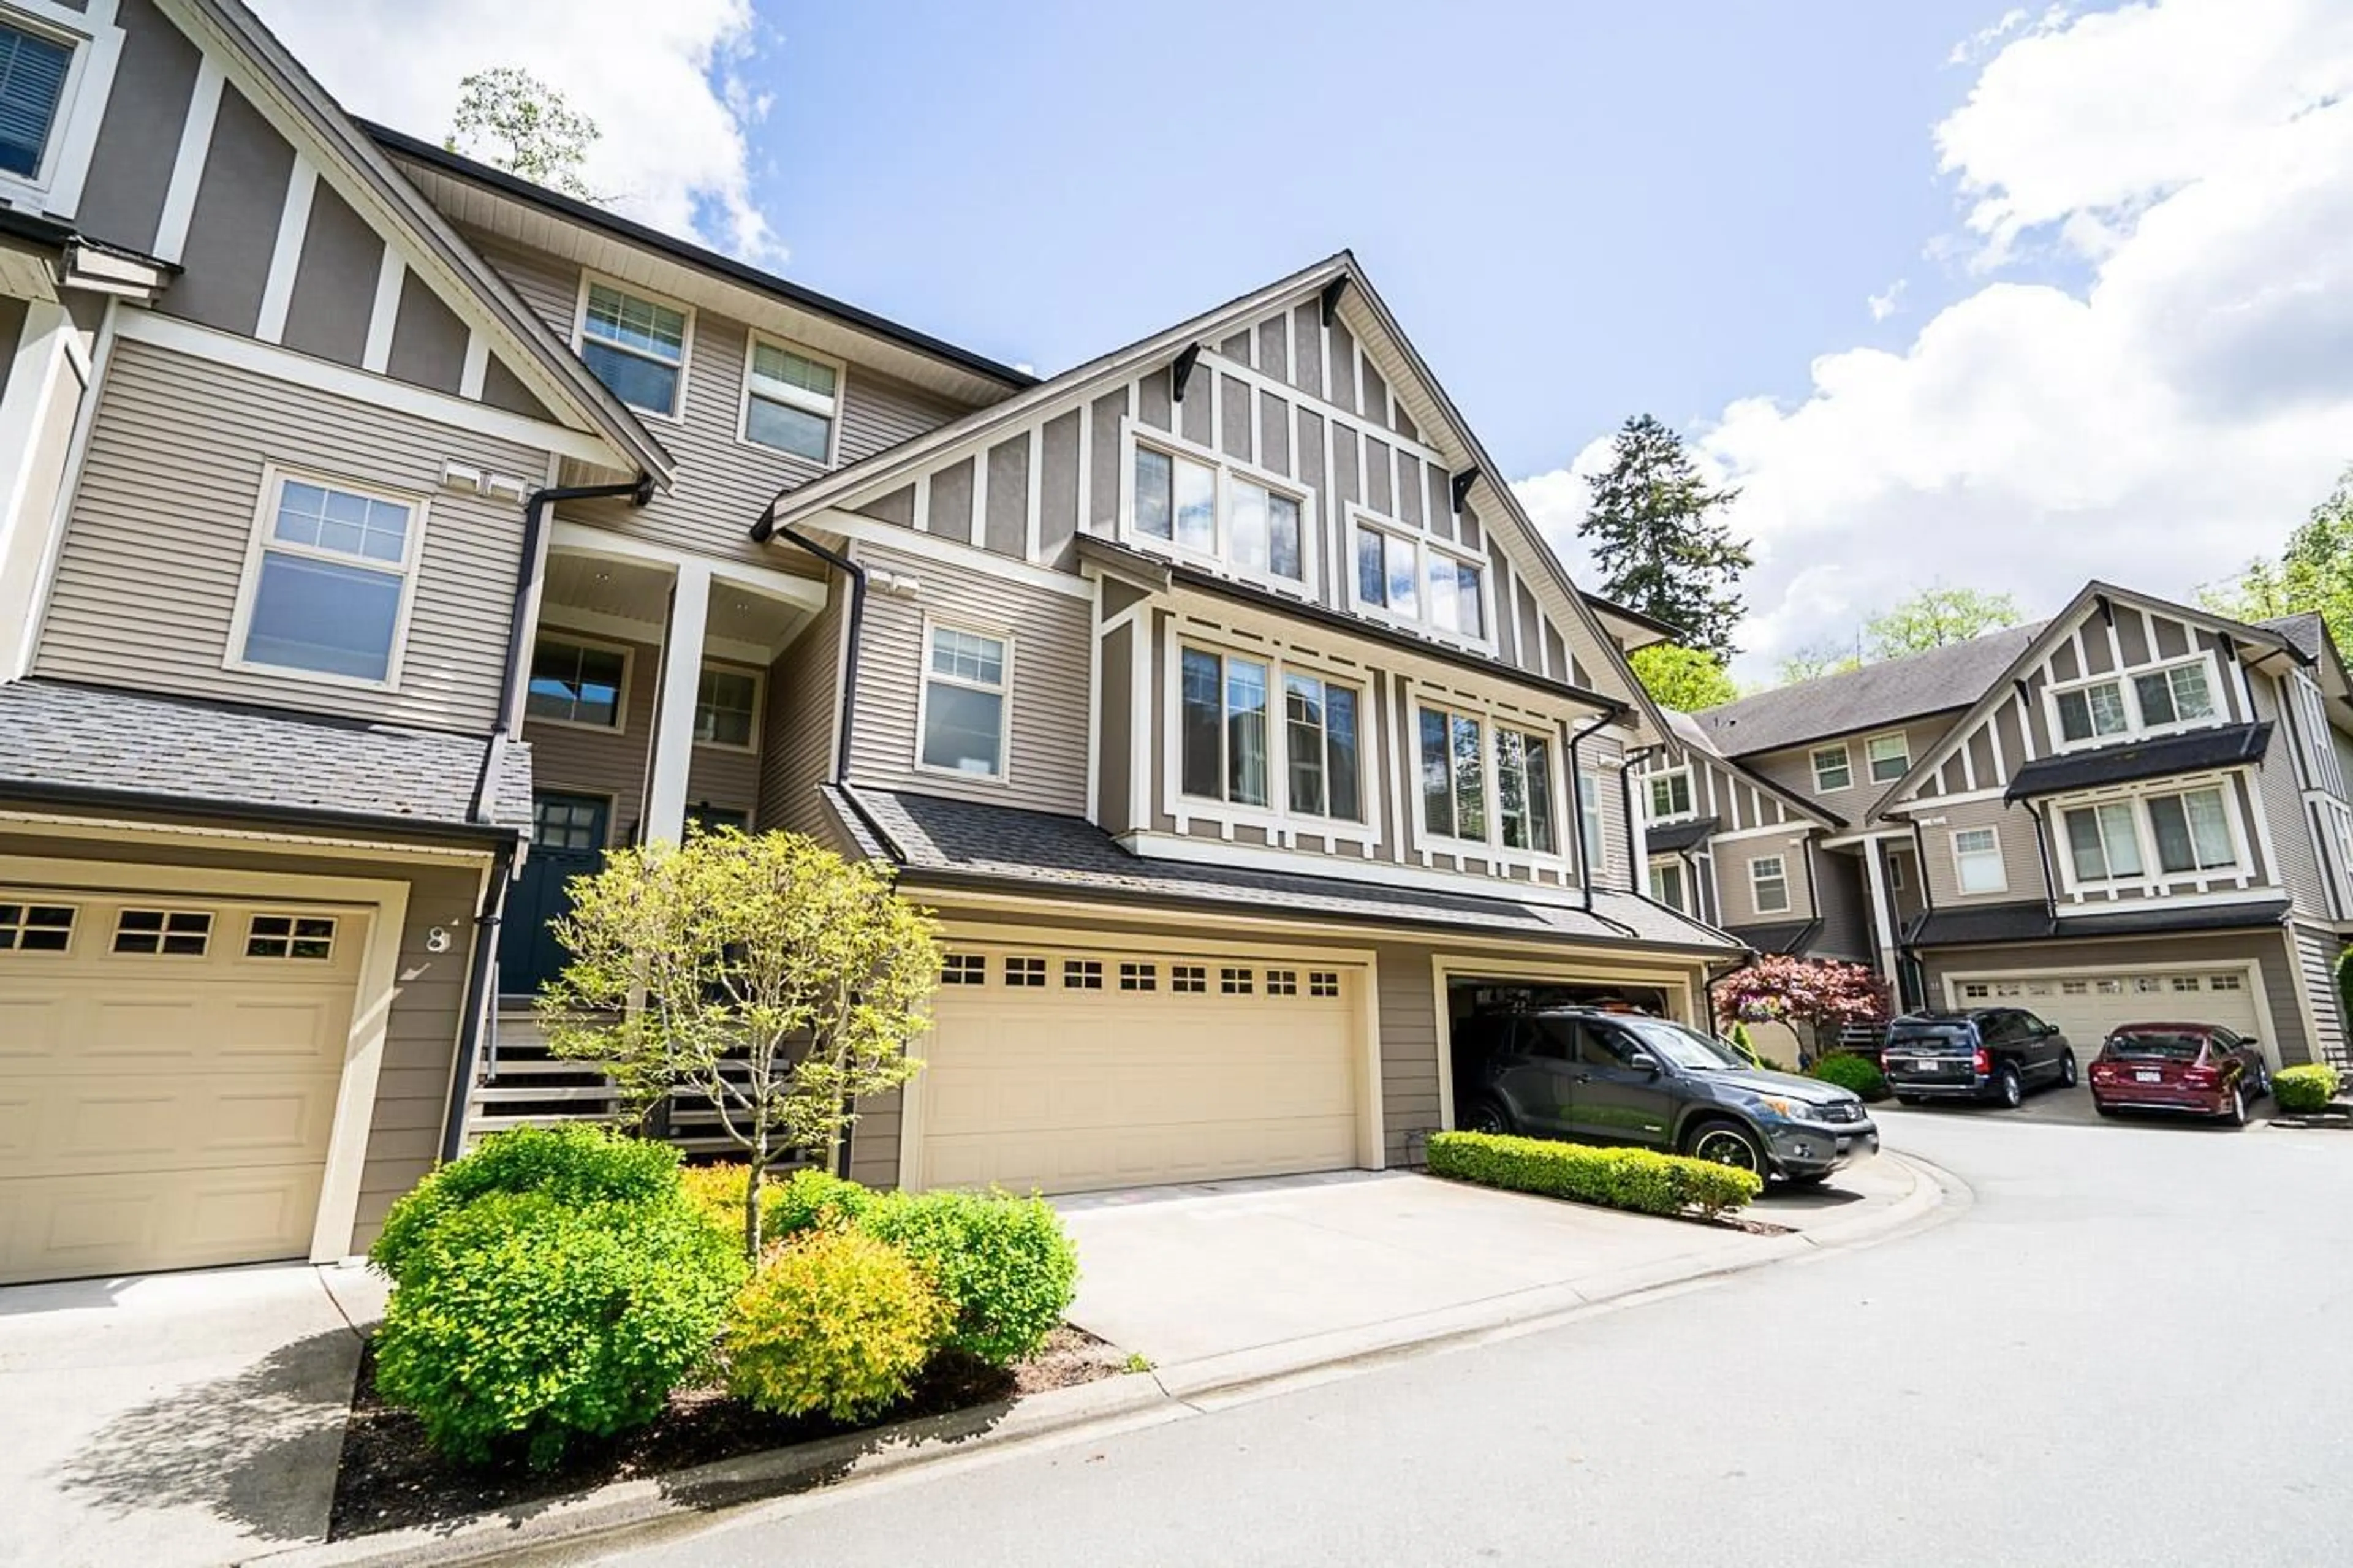 A pic from exterior of the house or condo for 9 9590 216 STREET, Langley British Columbia V1M0C9